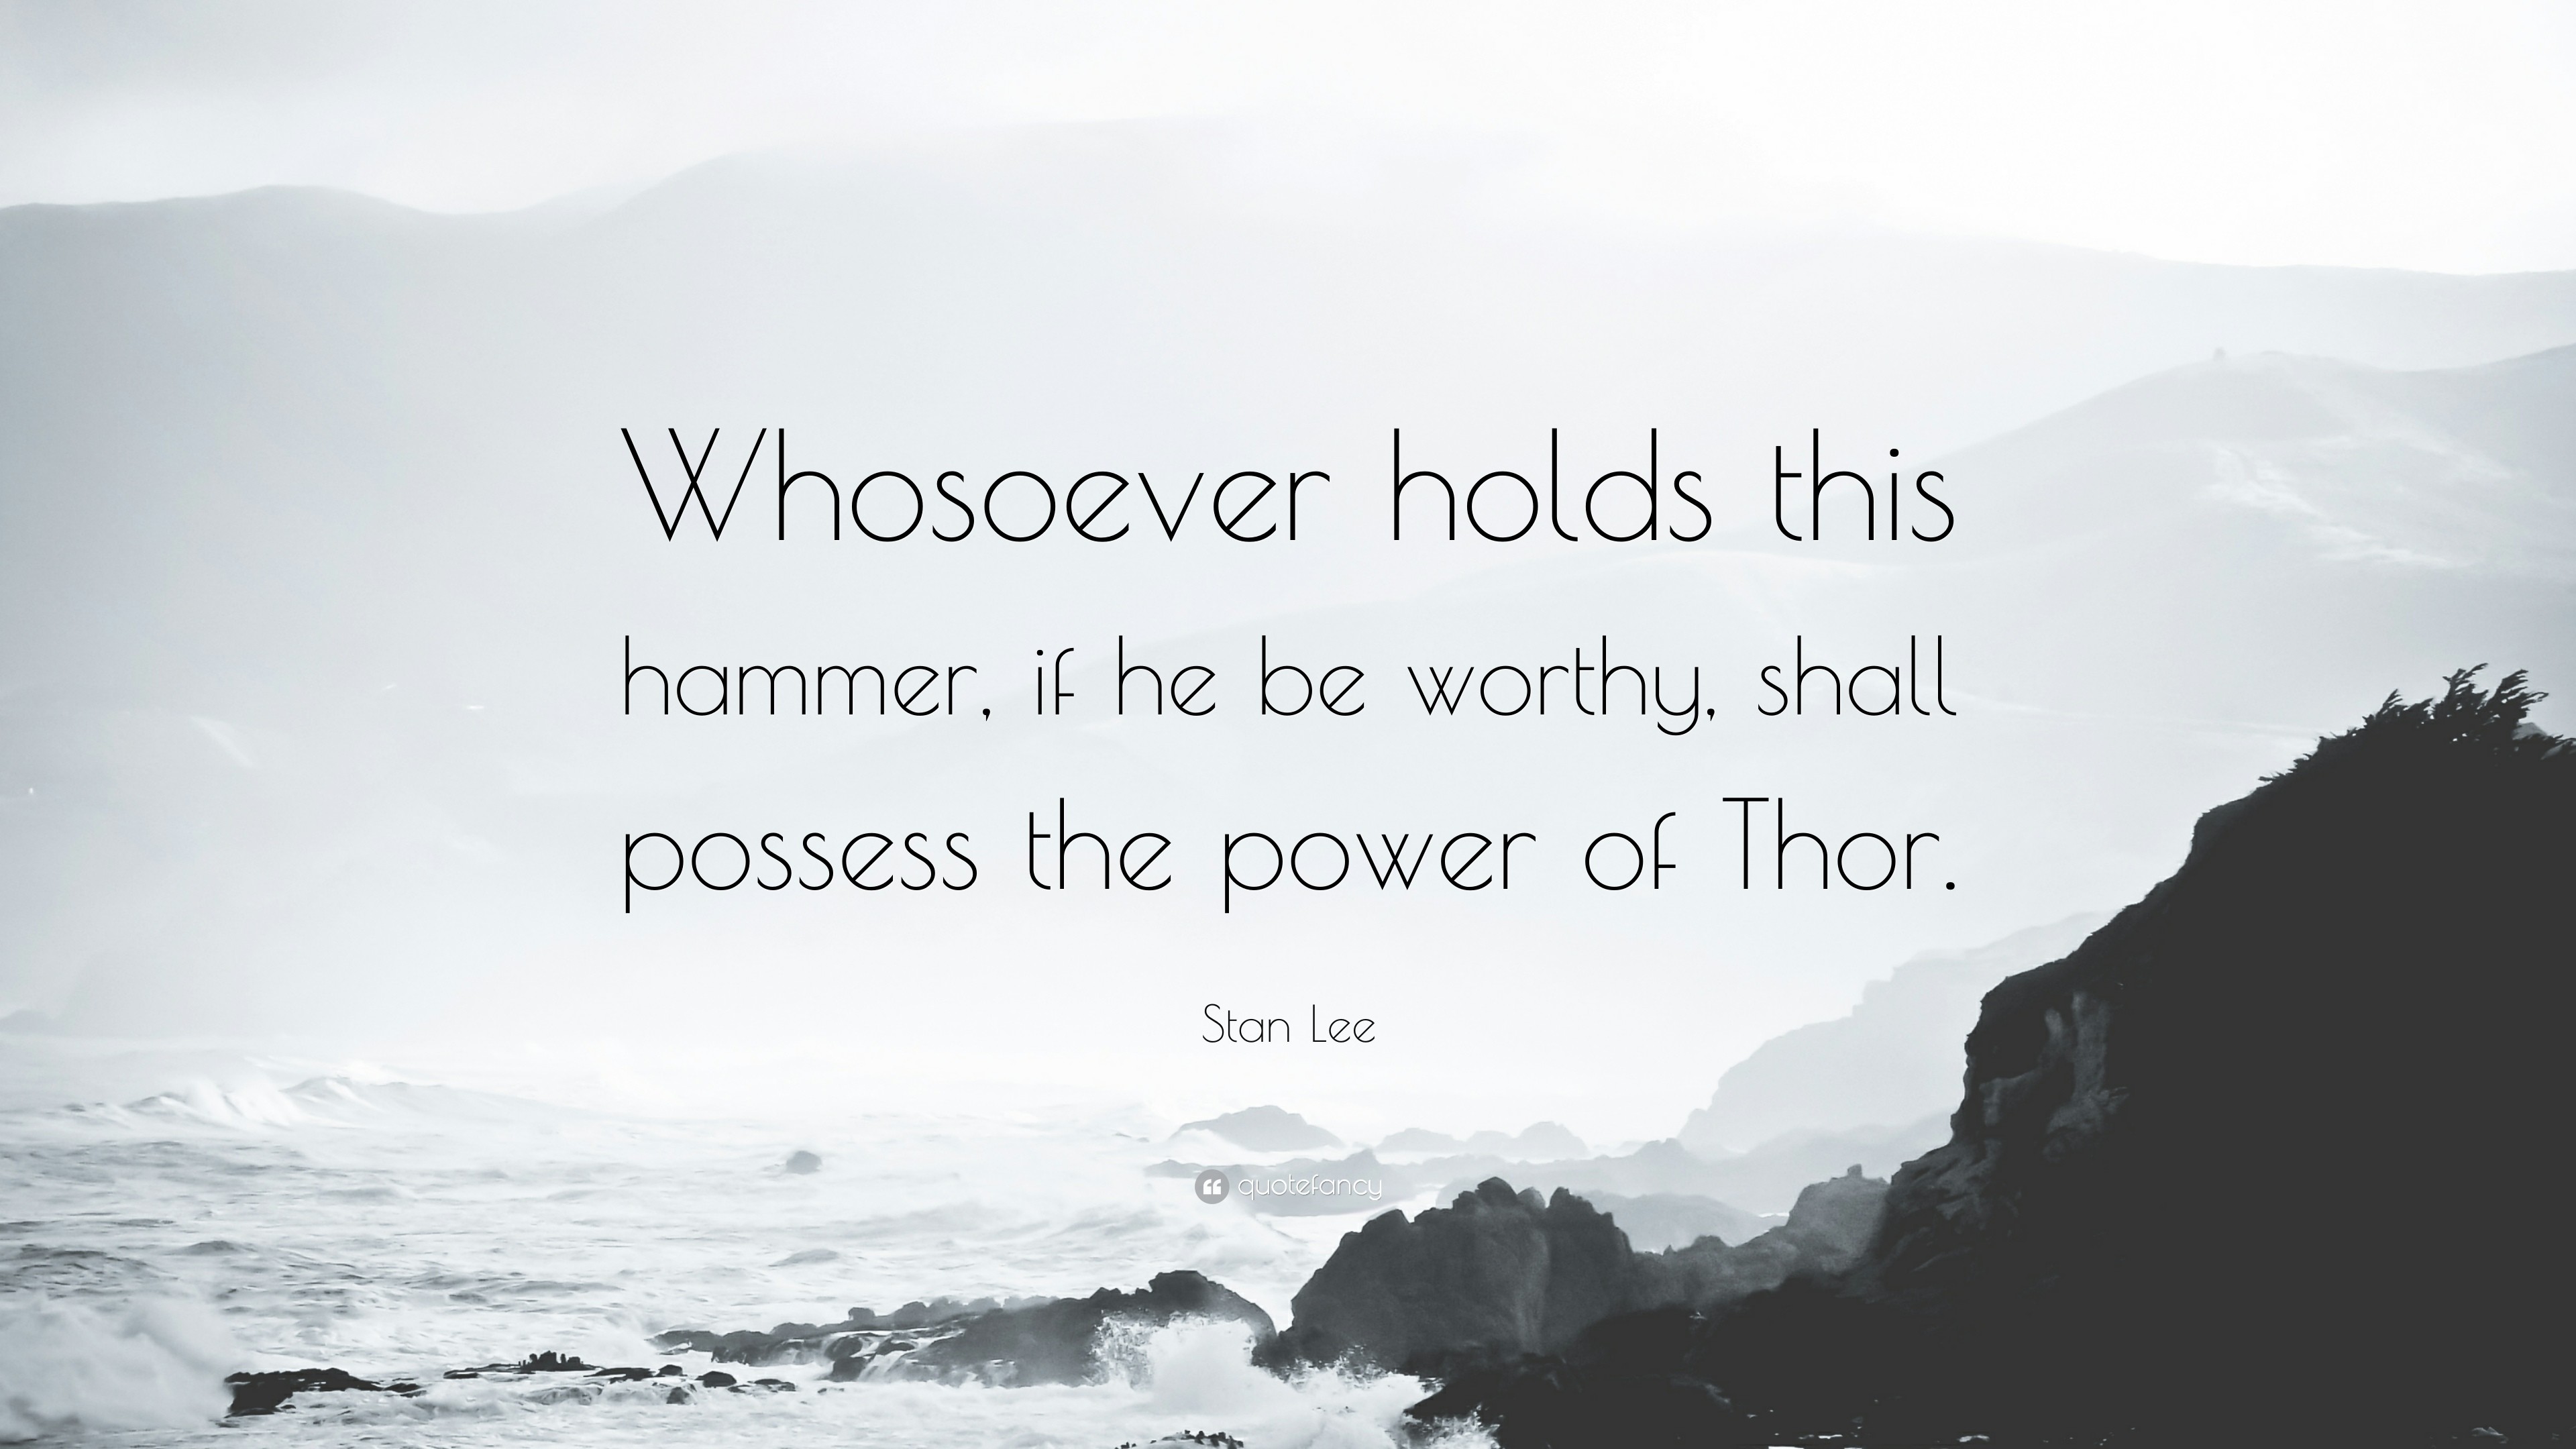 Stan Lee Quote Whosoever holds this hammer, if he be worthy, shall